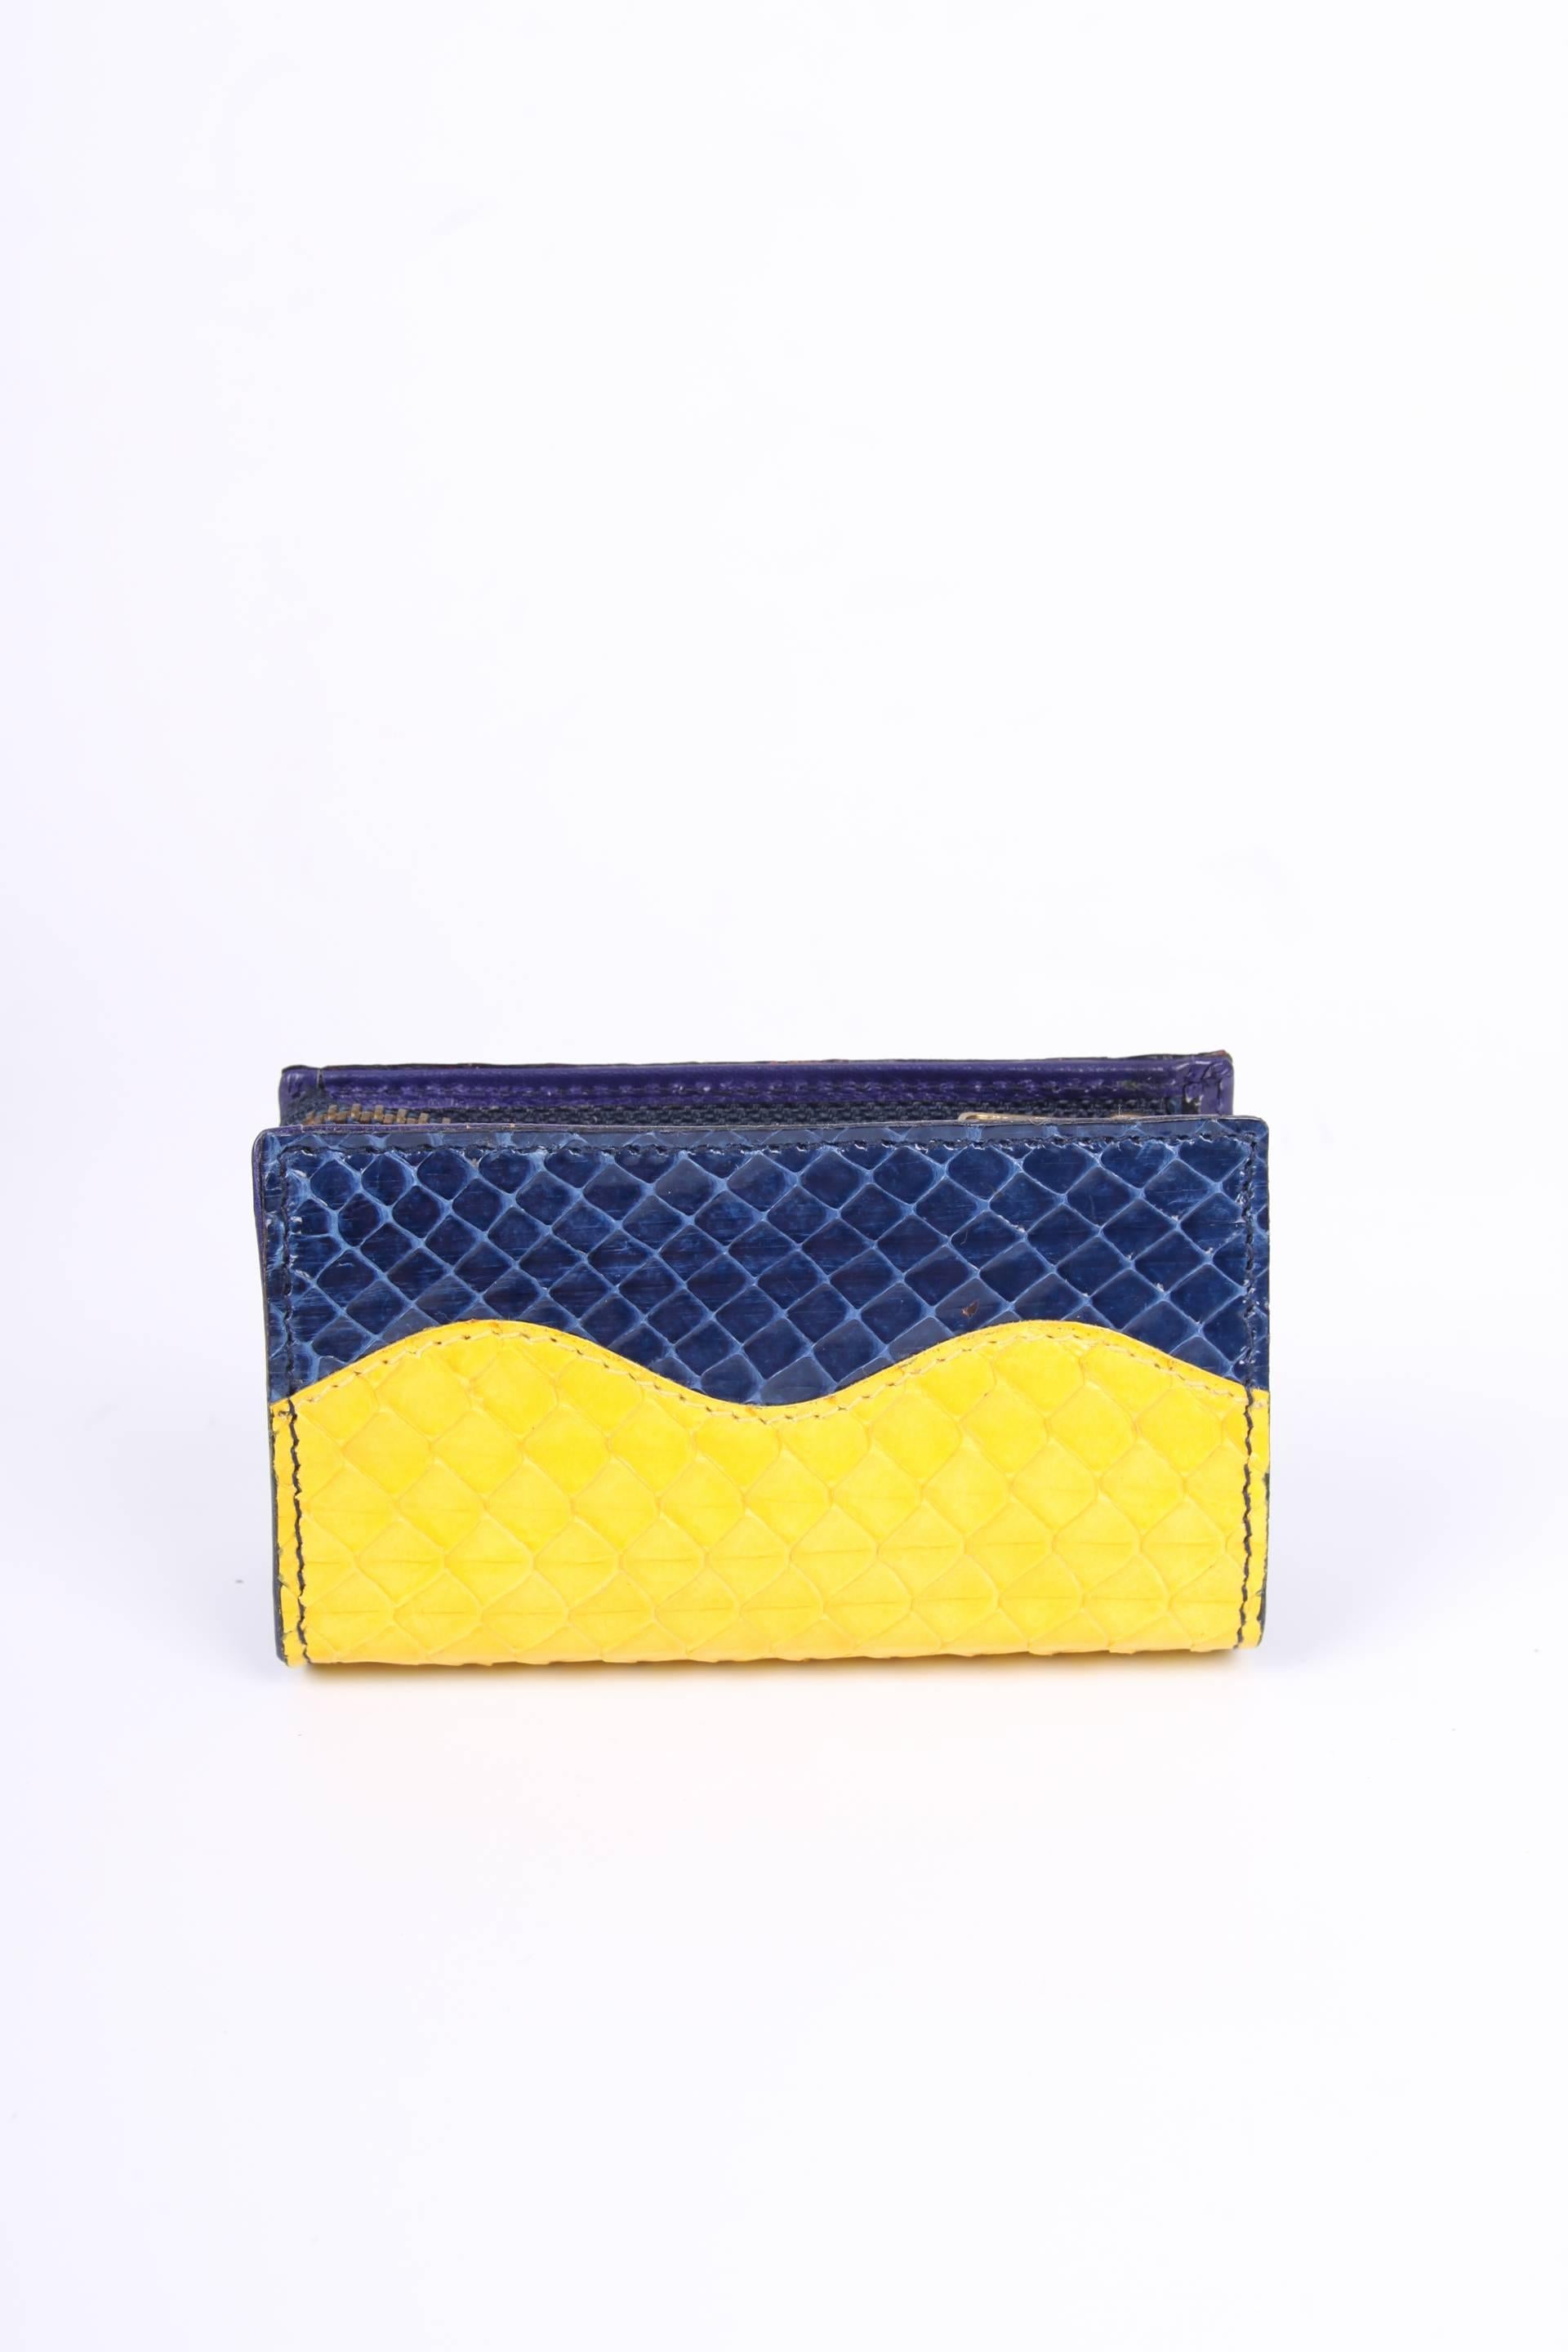 Blue Celine Micro Wallet Python Leather Vintage - red/green/blue/yellow